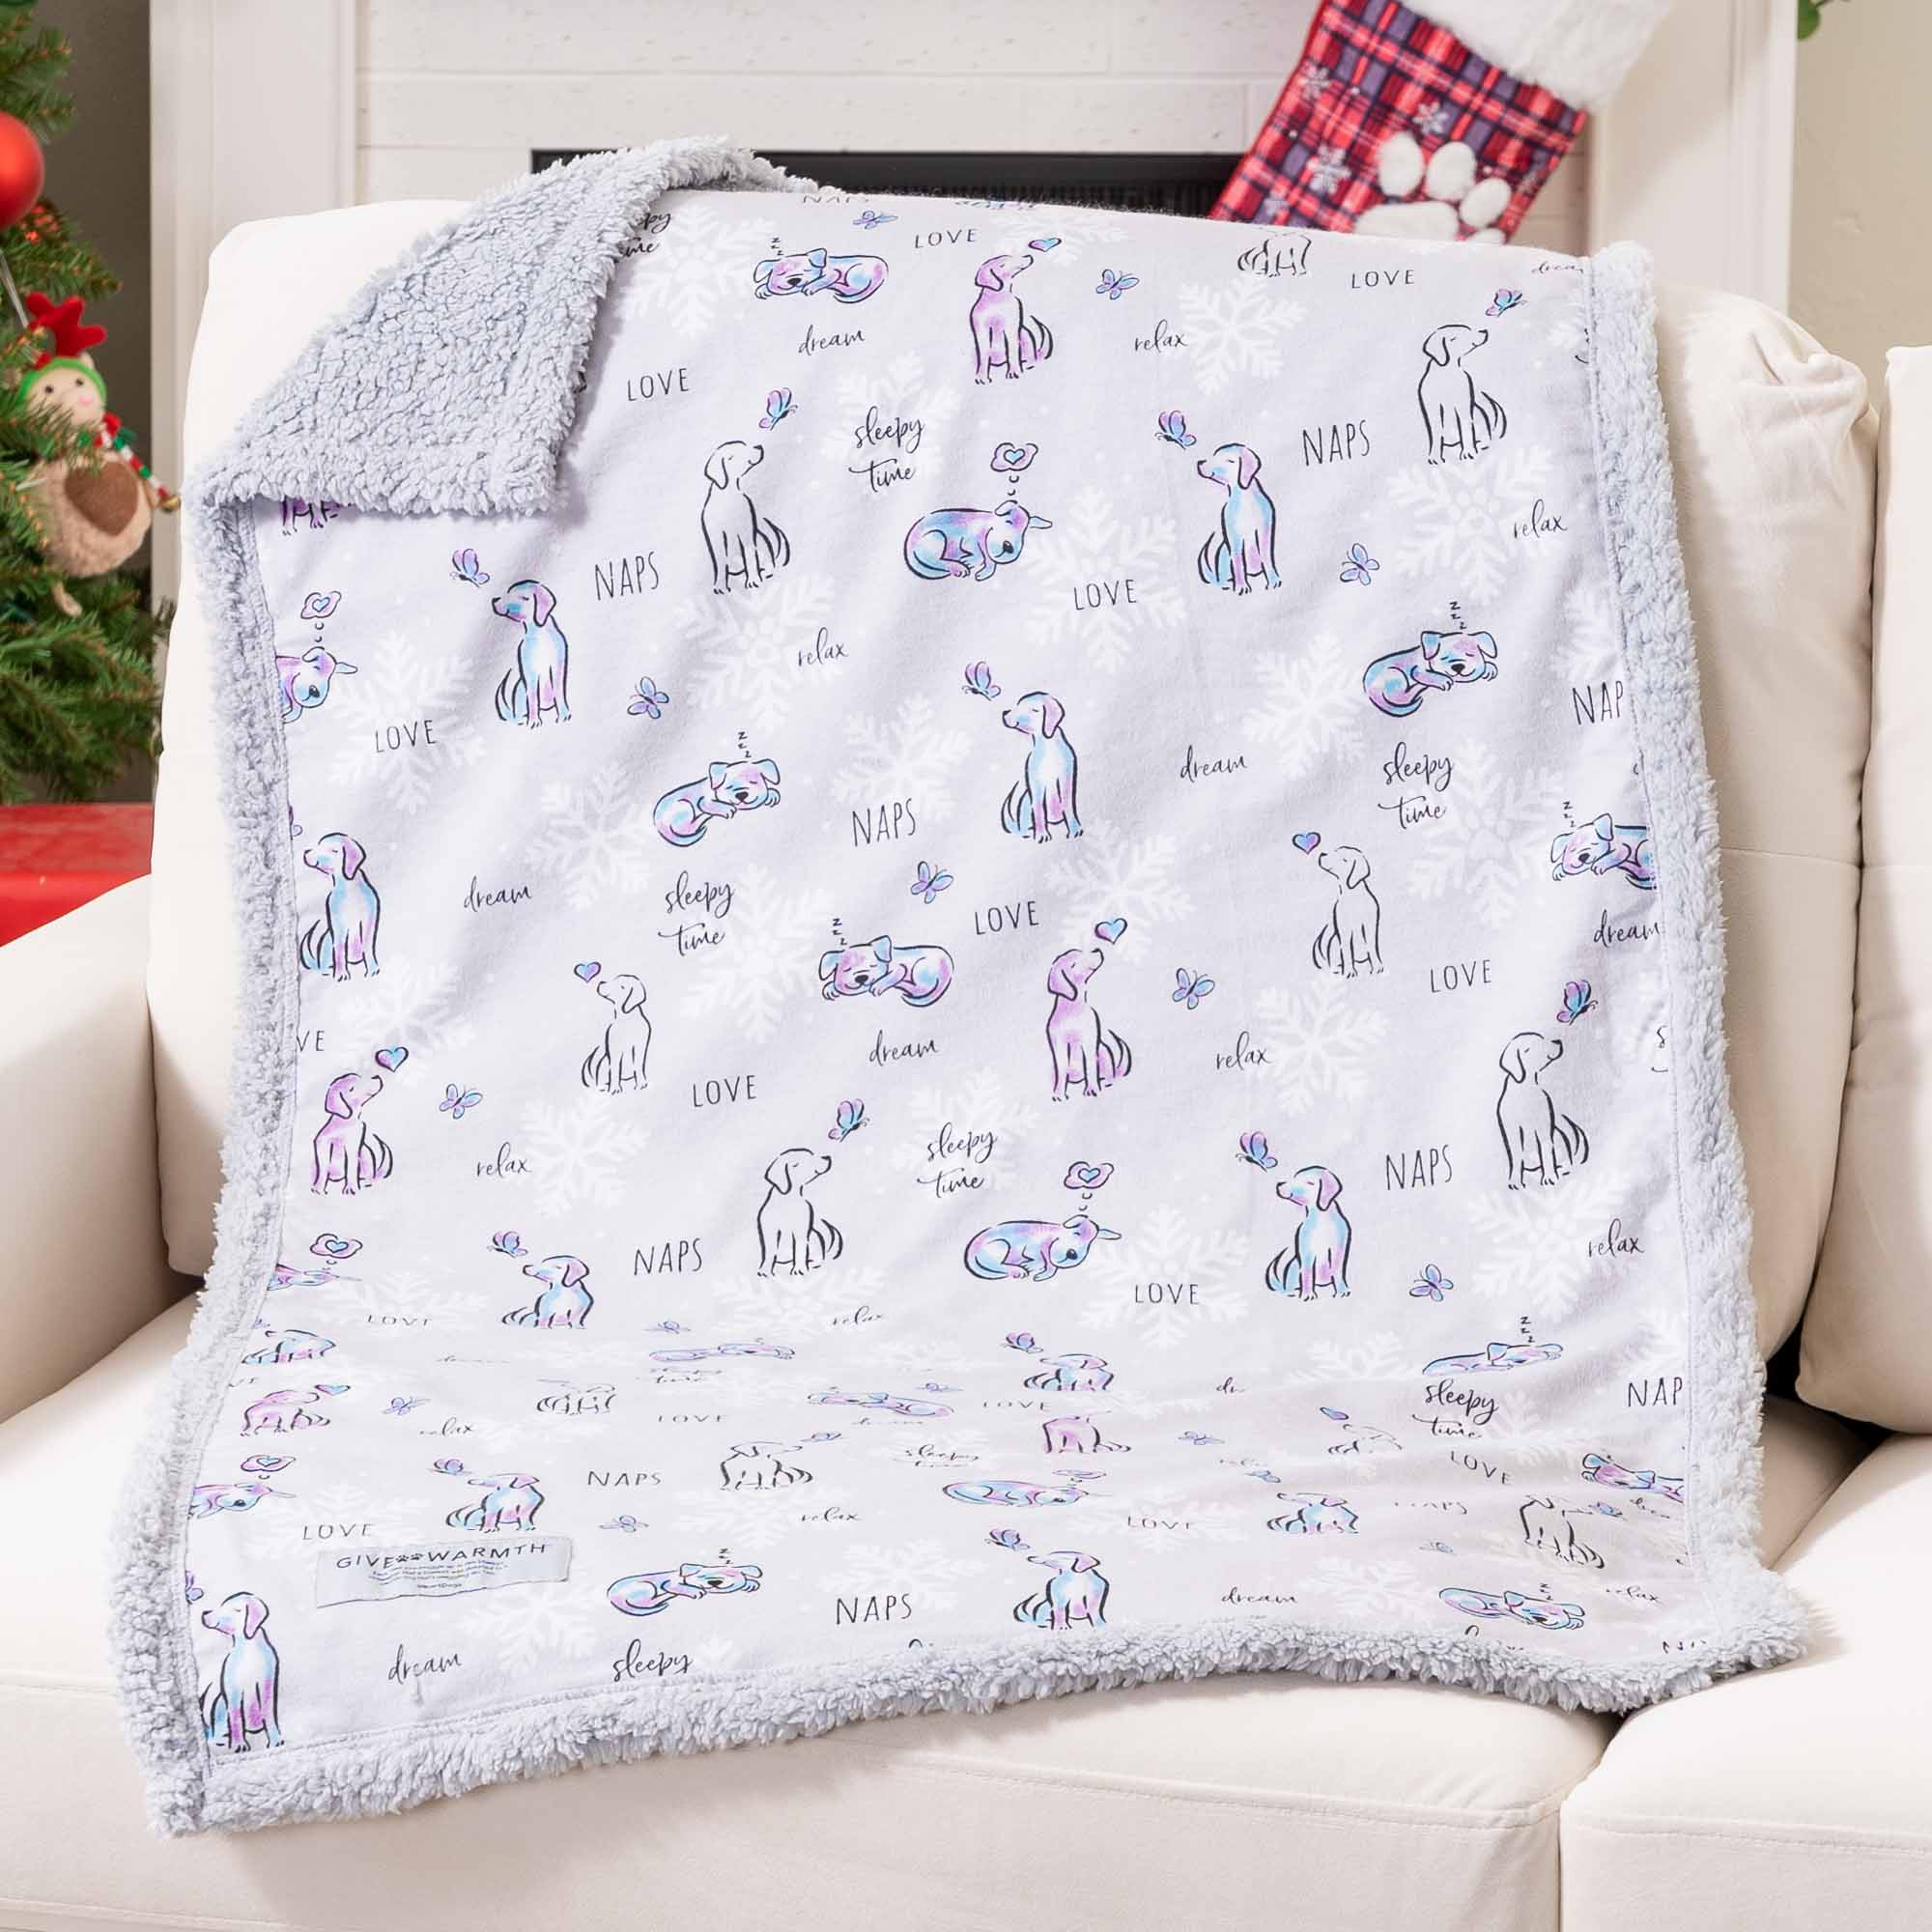 Image of Snuggle Pup & Butterfly- Flannel & Sherpa Dog Blanket 40" x 25" – Sneak Peek Special Pricing 35% Off